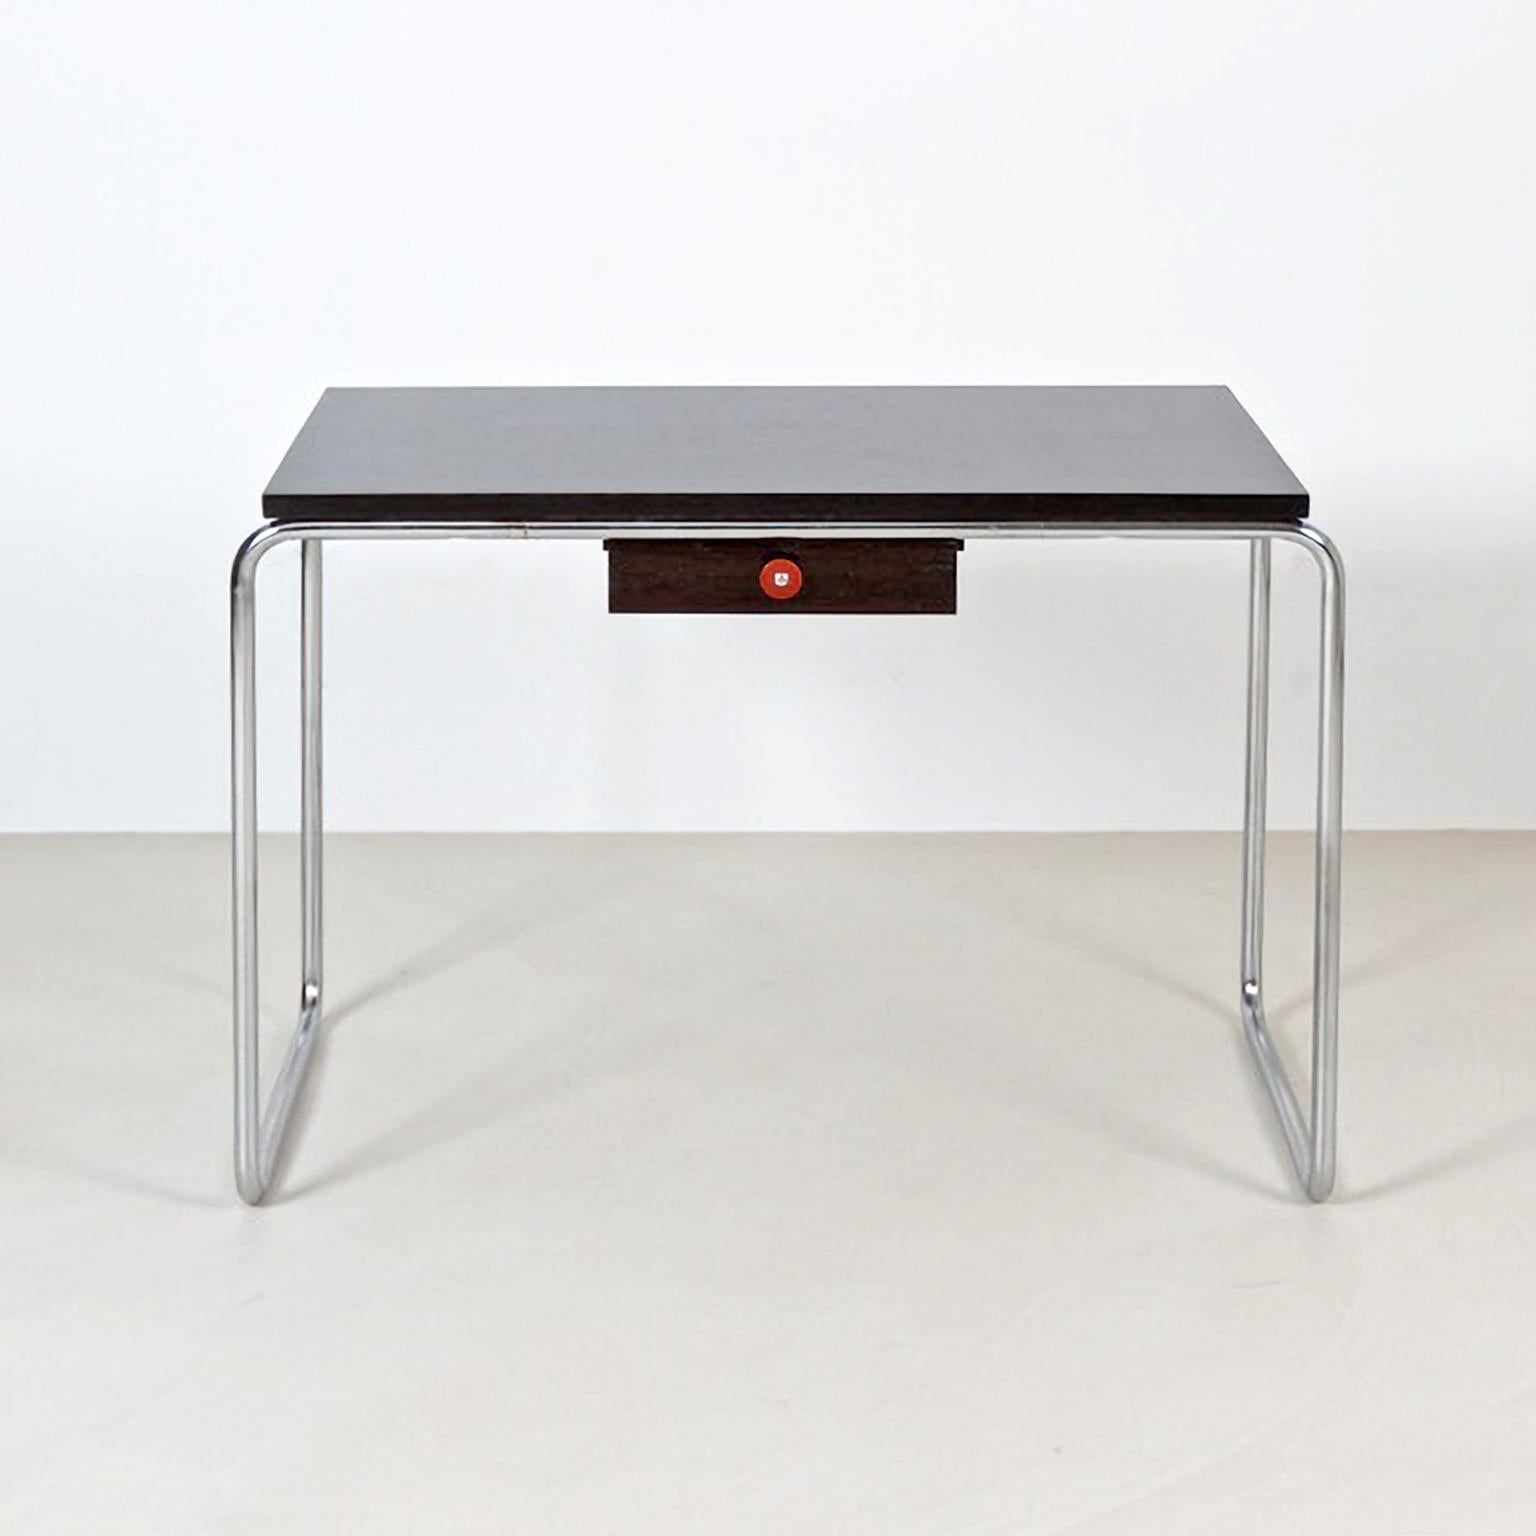 Contemporary Bespoke Modernist Tubular Steel Table in Chromed Metal and Glossy Lacquered Wood For Sale